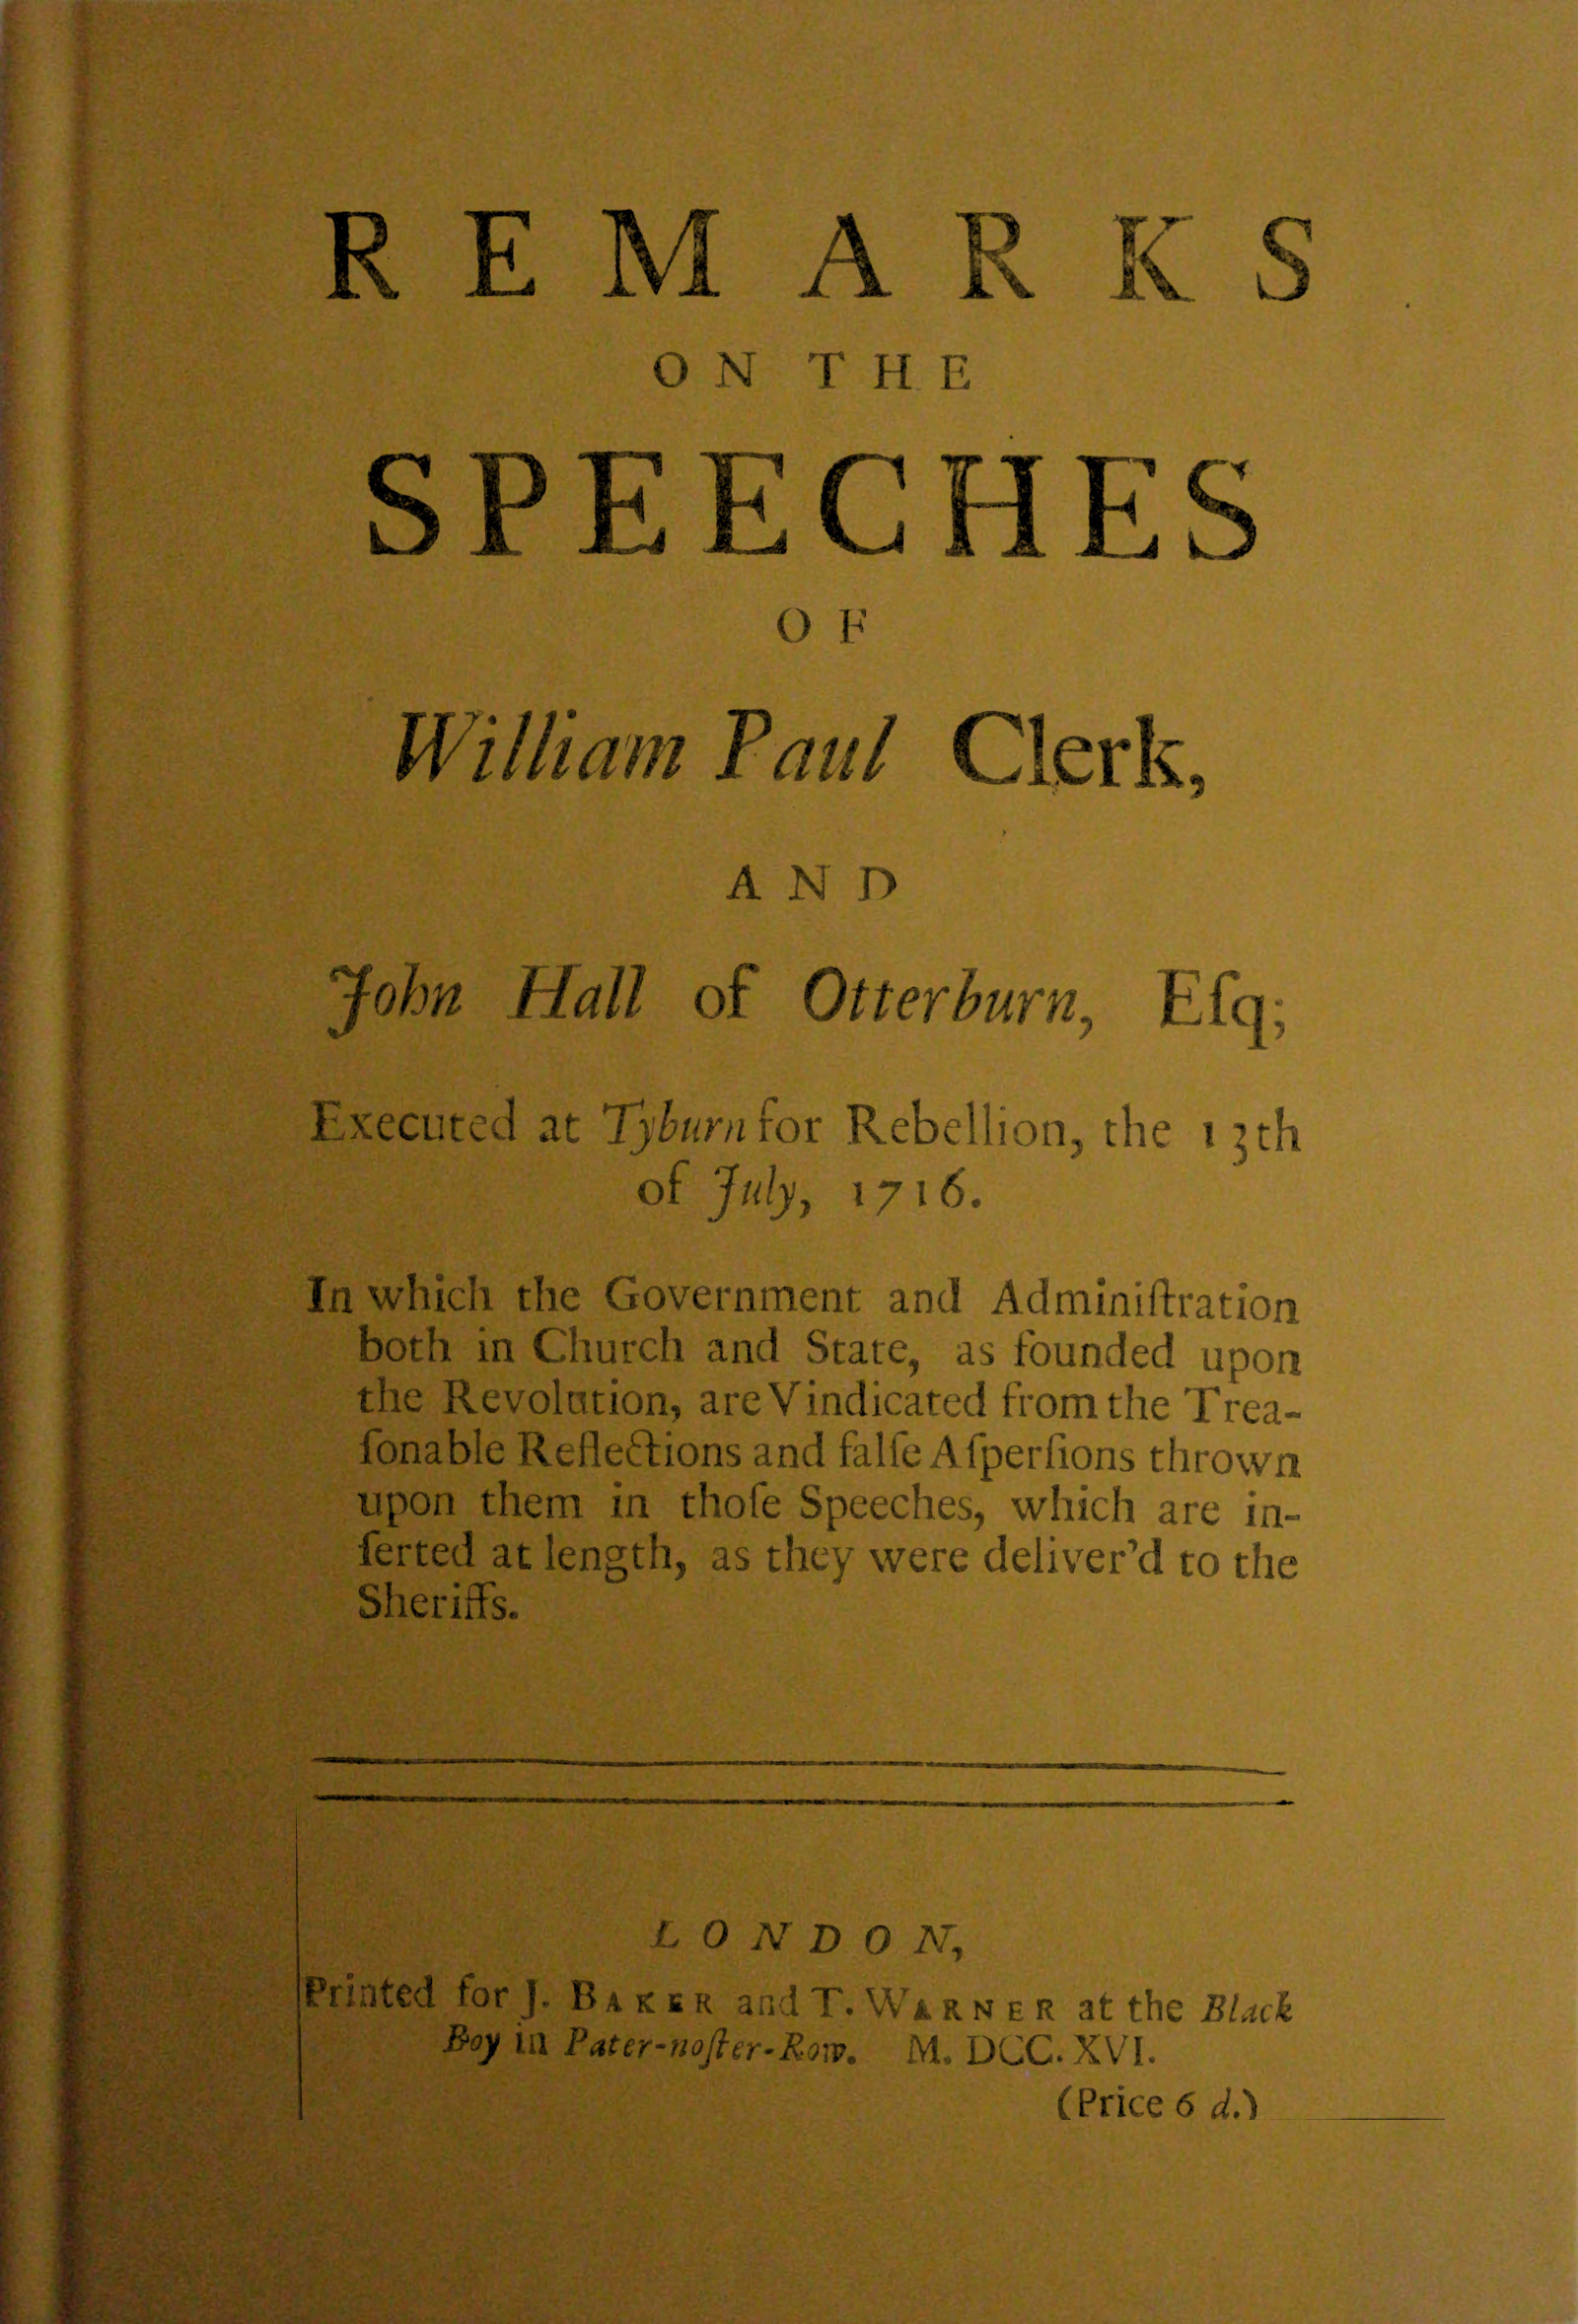 Remarks on the speeches of William Paul Clerk, and John Hall of Otterburn, Esq